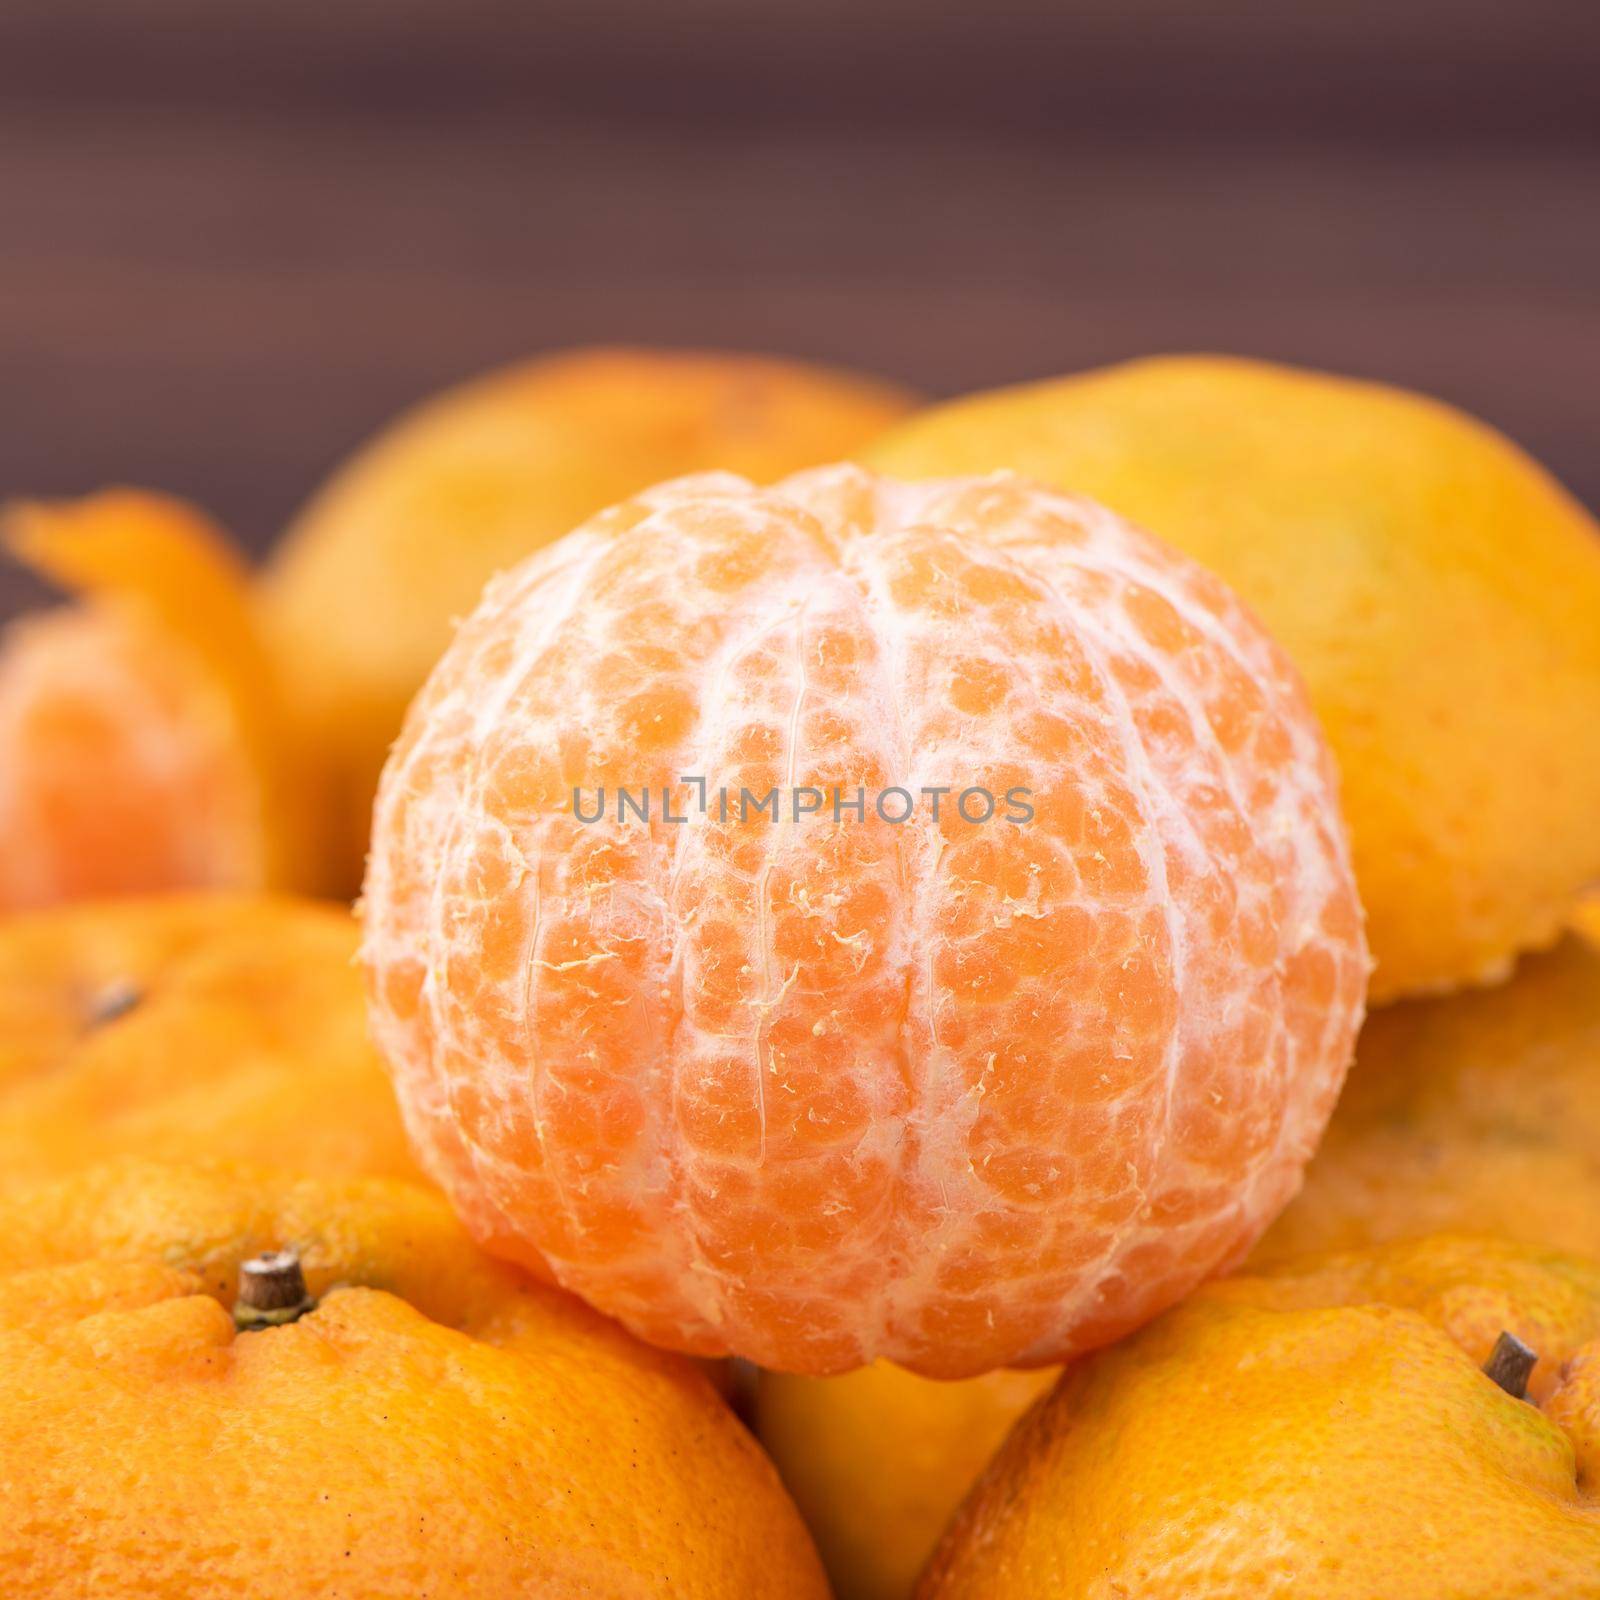 Fresh, beautiful orange color tangerine on bamboo sieve over dark wooden table. Seasonal, traditional fruit of Chinese lunar new year, close up.